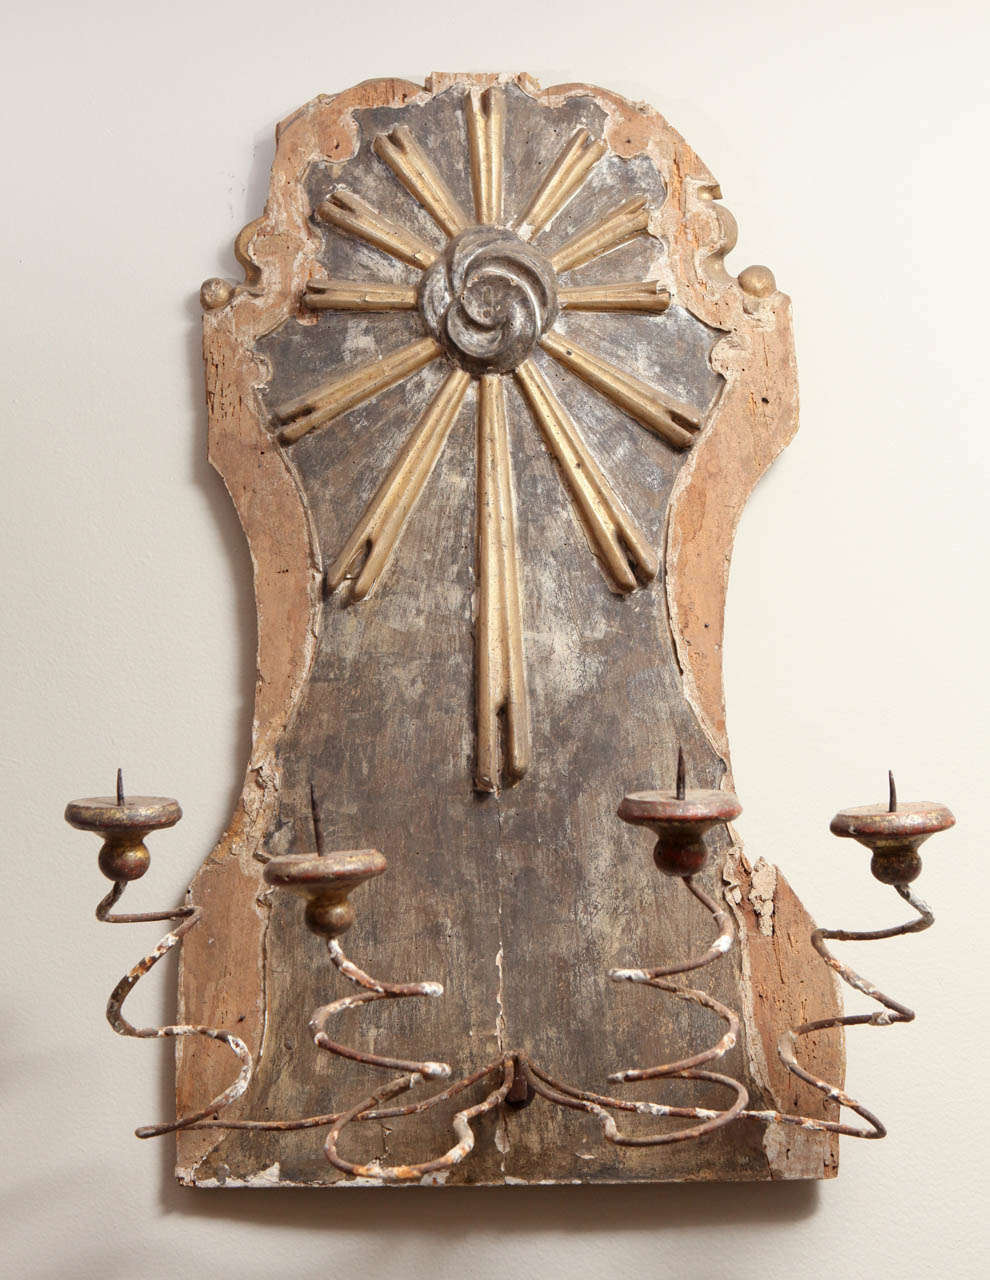 This is an 18th century fragment of a sunburst. It is painted and carved wood. The four curly arms are candleholders. The fragment is from Italy and is fitted to be wall mounted.